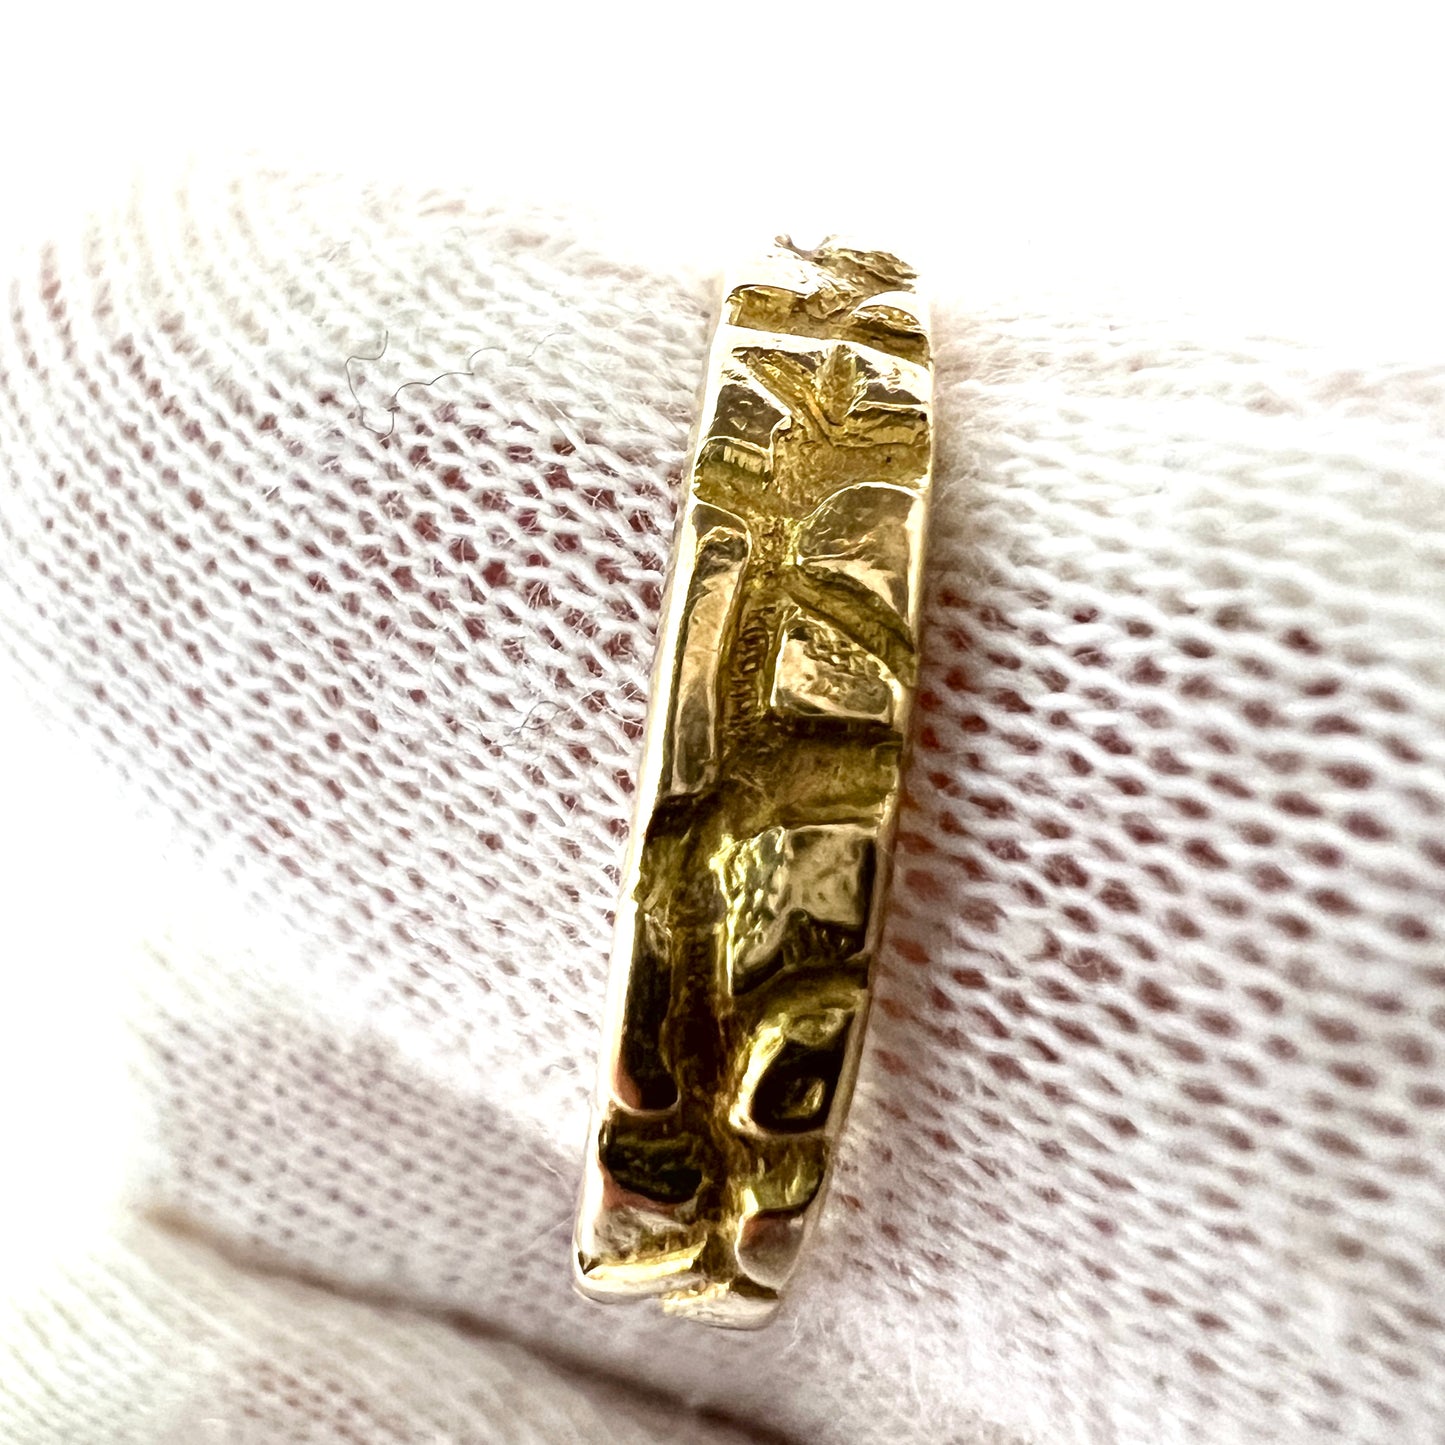 Bjorn Weckstrom, Lapponia year 1970. Vintage 18k Gold Unisex Ring Band. Signed.